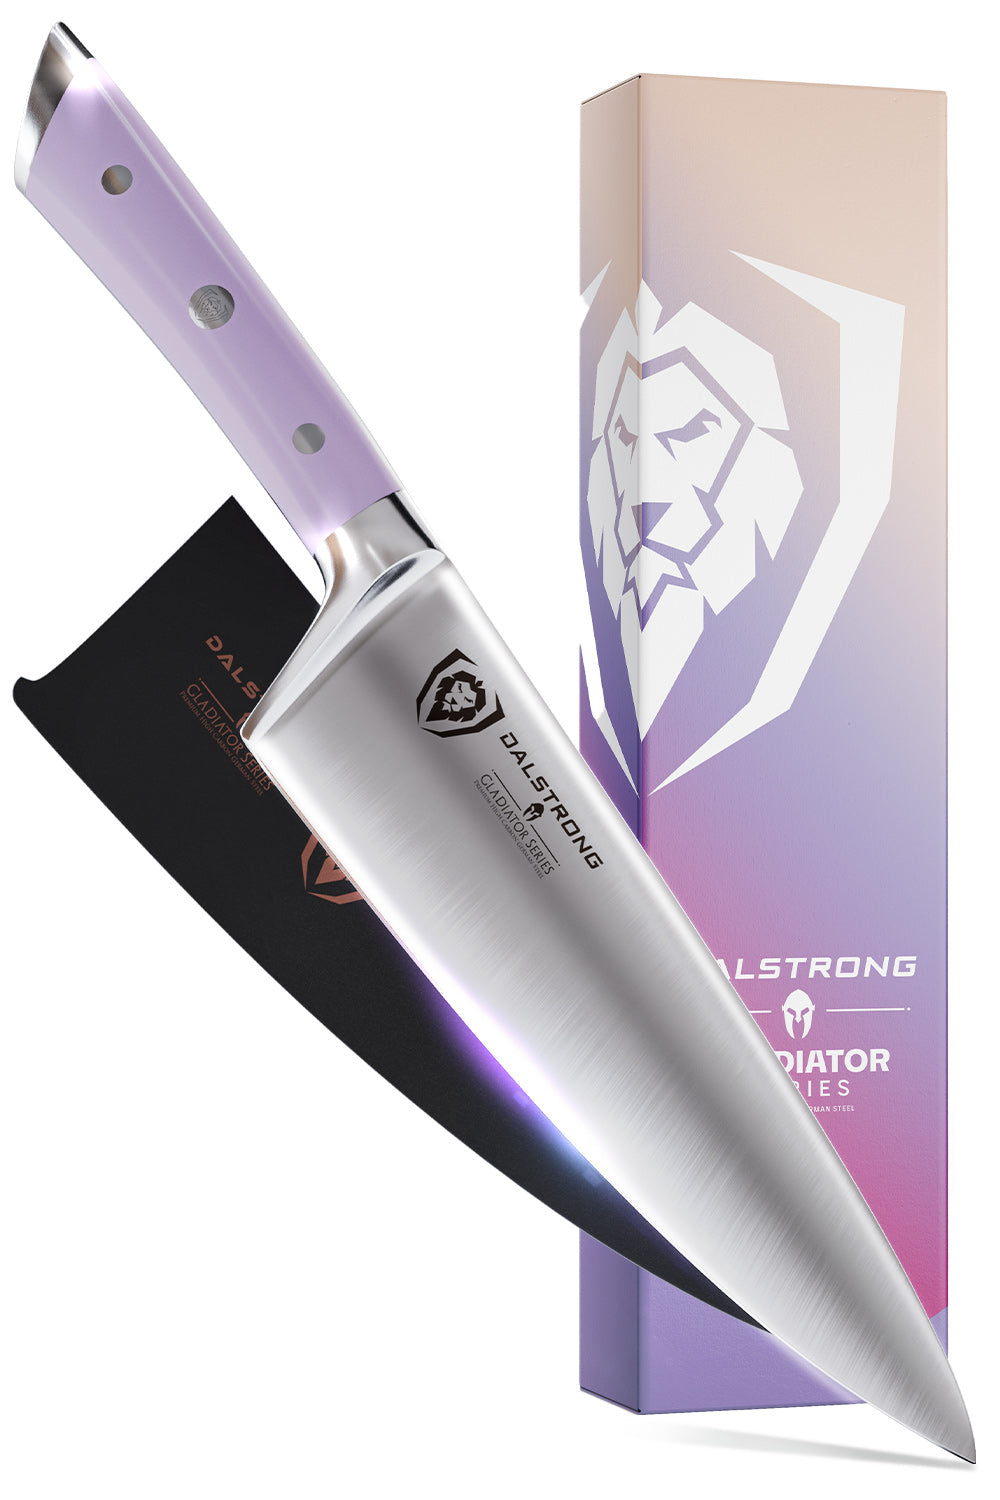 Dalstrong gladiator series 8 inch chef knife with lilac handle in front of it's premium packaging.